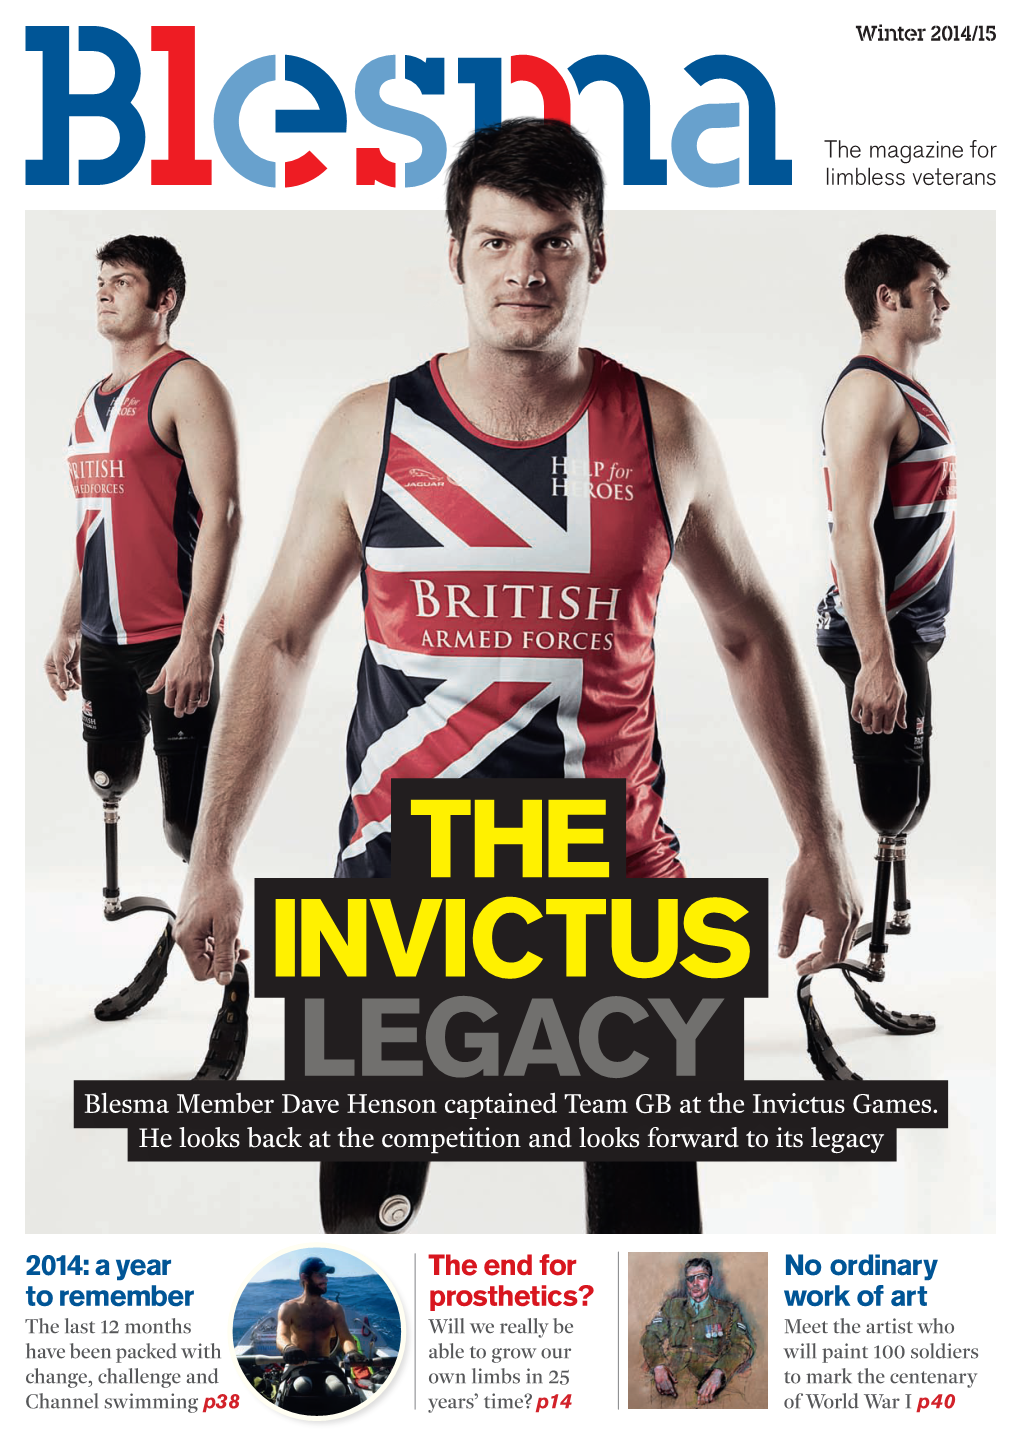 THE INVICTUS LEGACY Blesma Member Dave Henson Captained Team GB at the Invictus Games